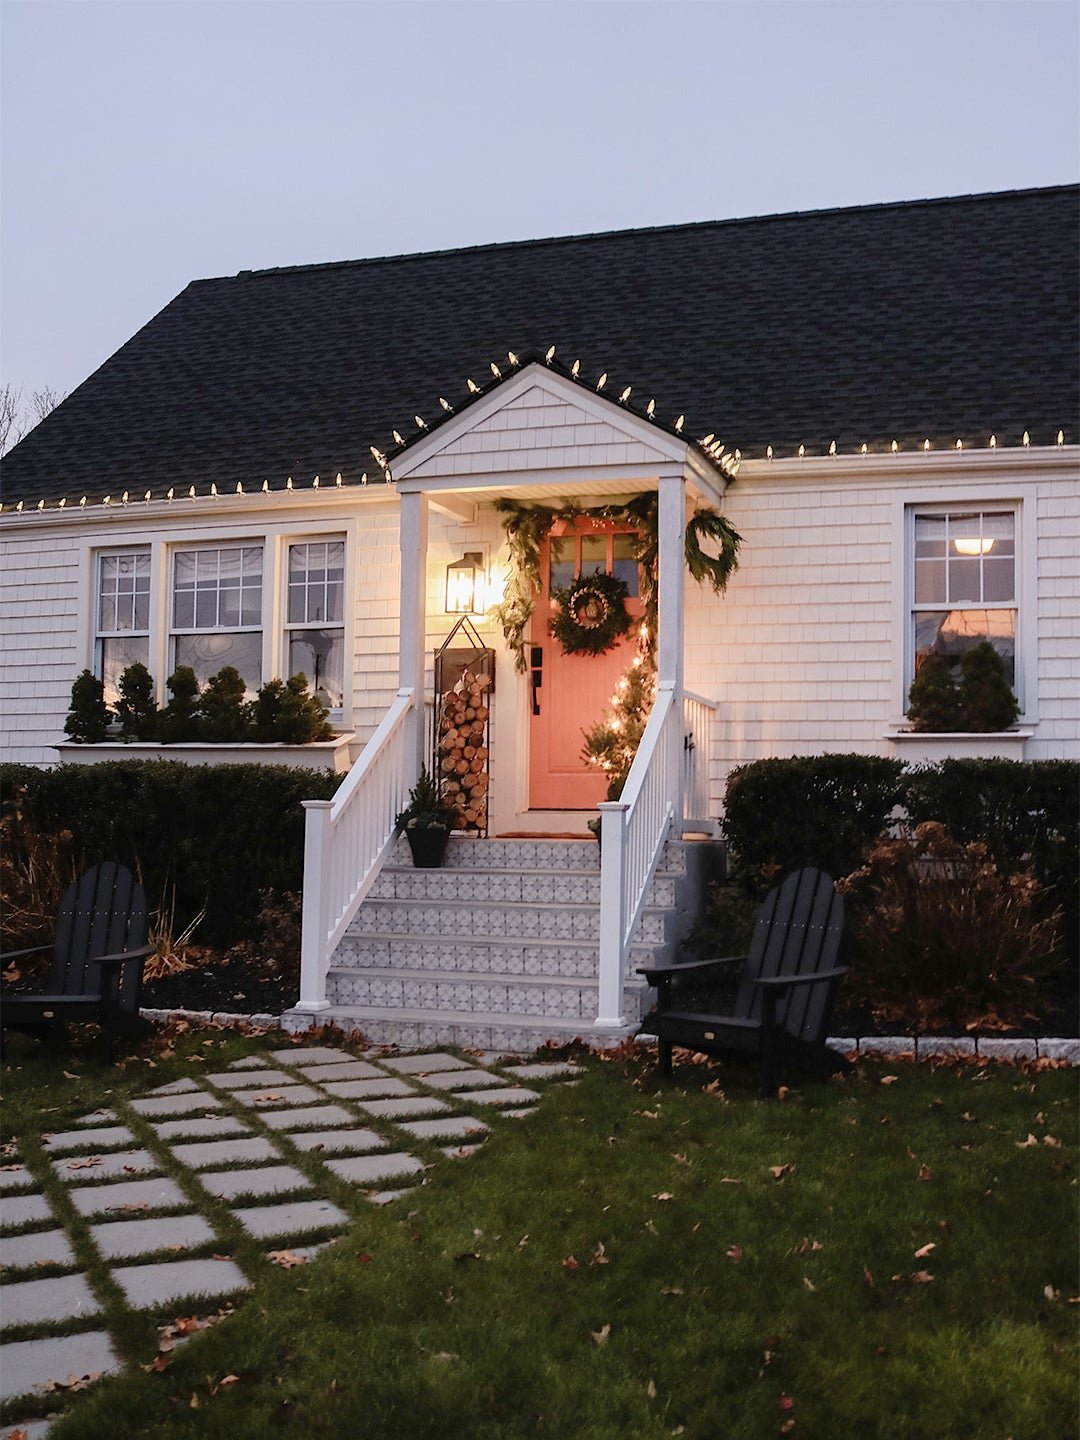 This Home’s $35 Holiday Lights Went Up on the Roof in Under an Hour